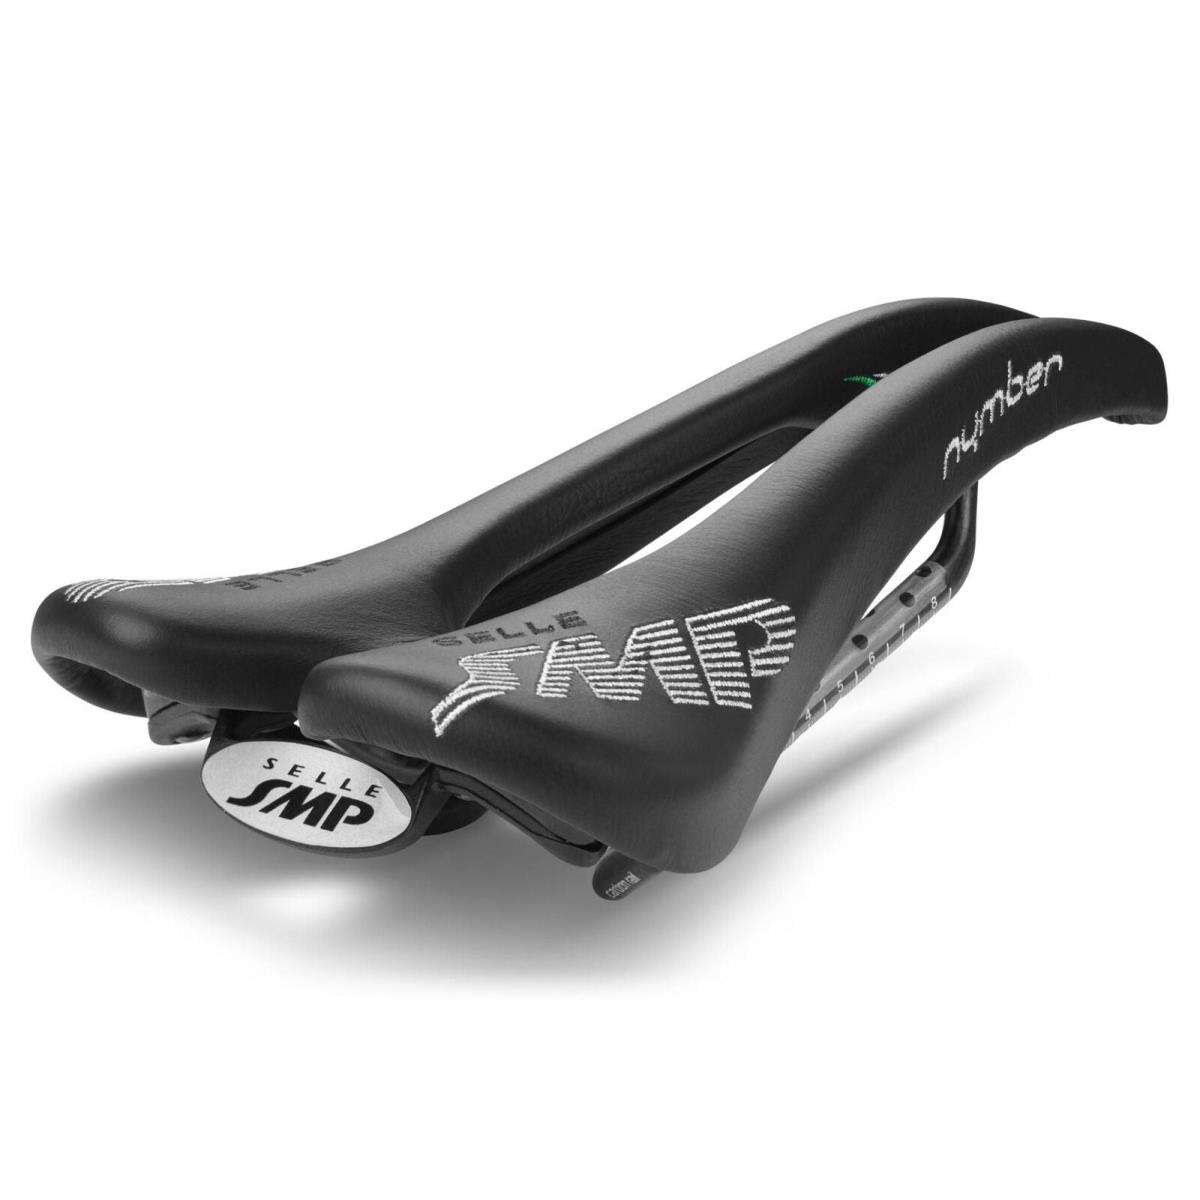 Selle Smp Nymber Saddle with Carbon Rails Black